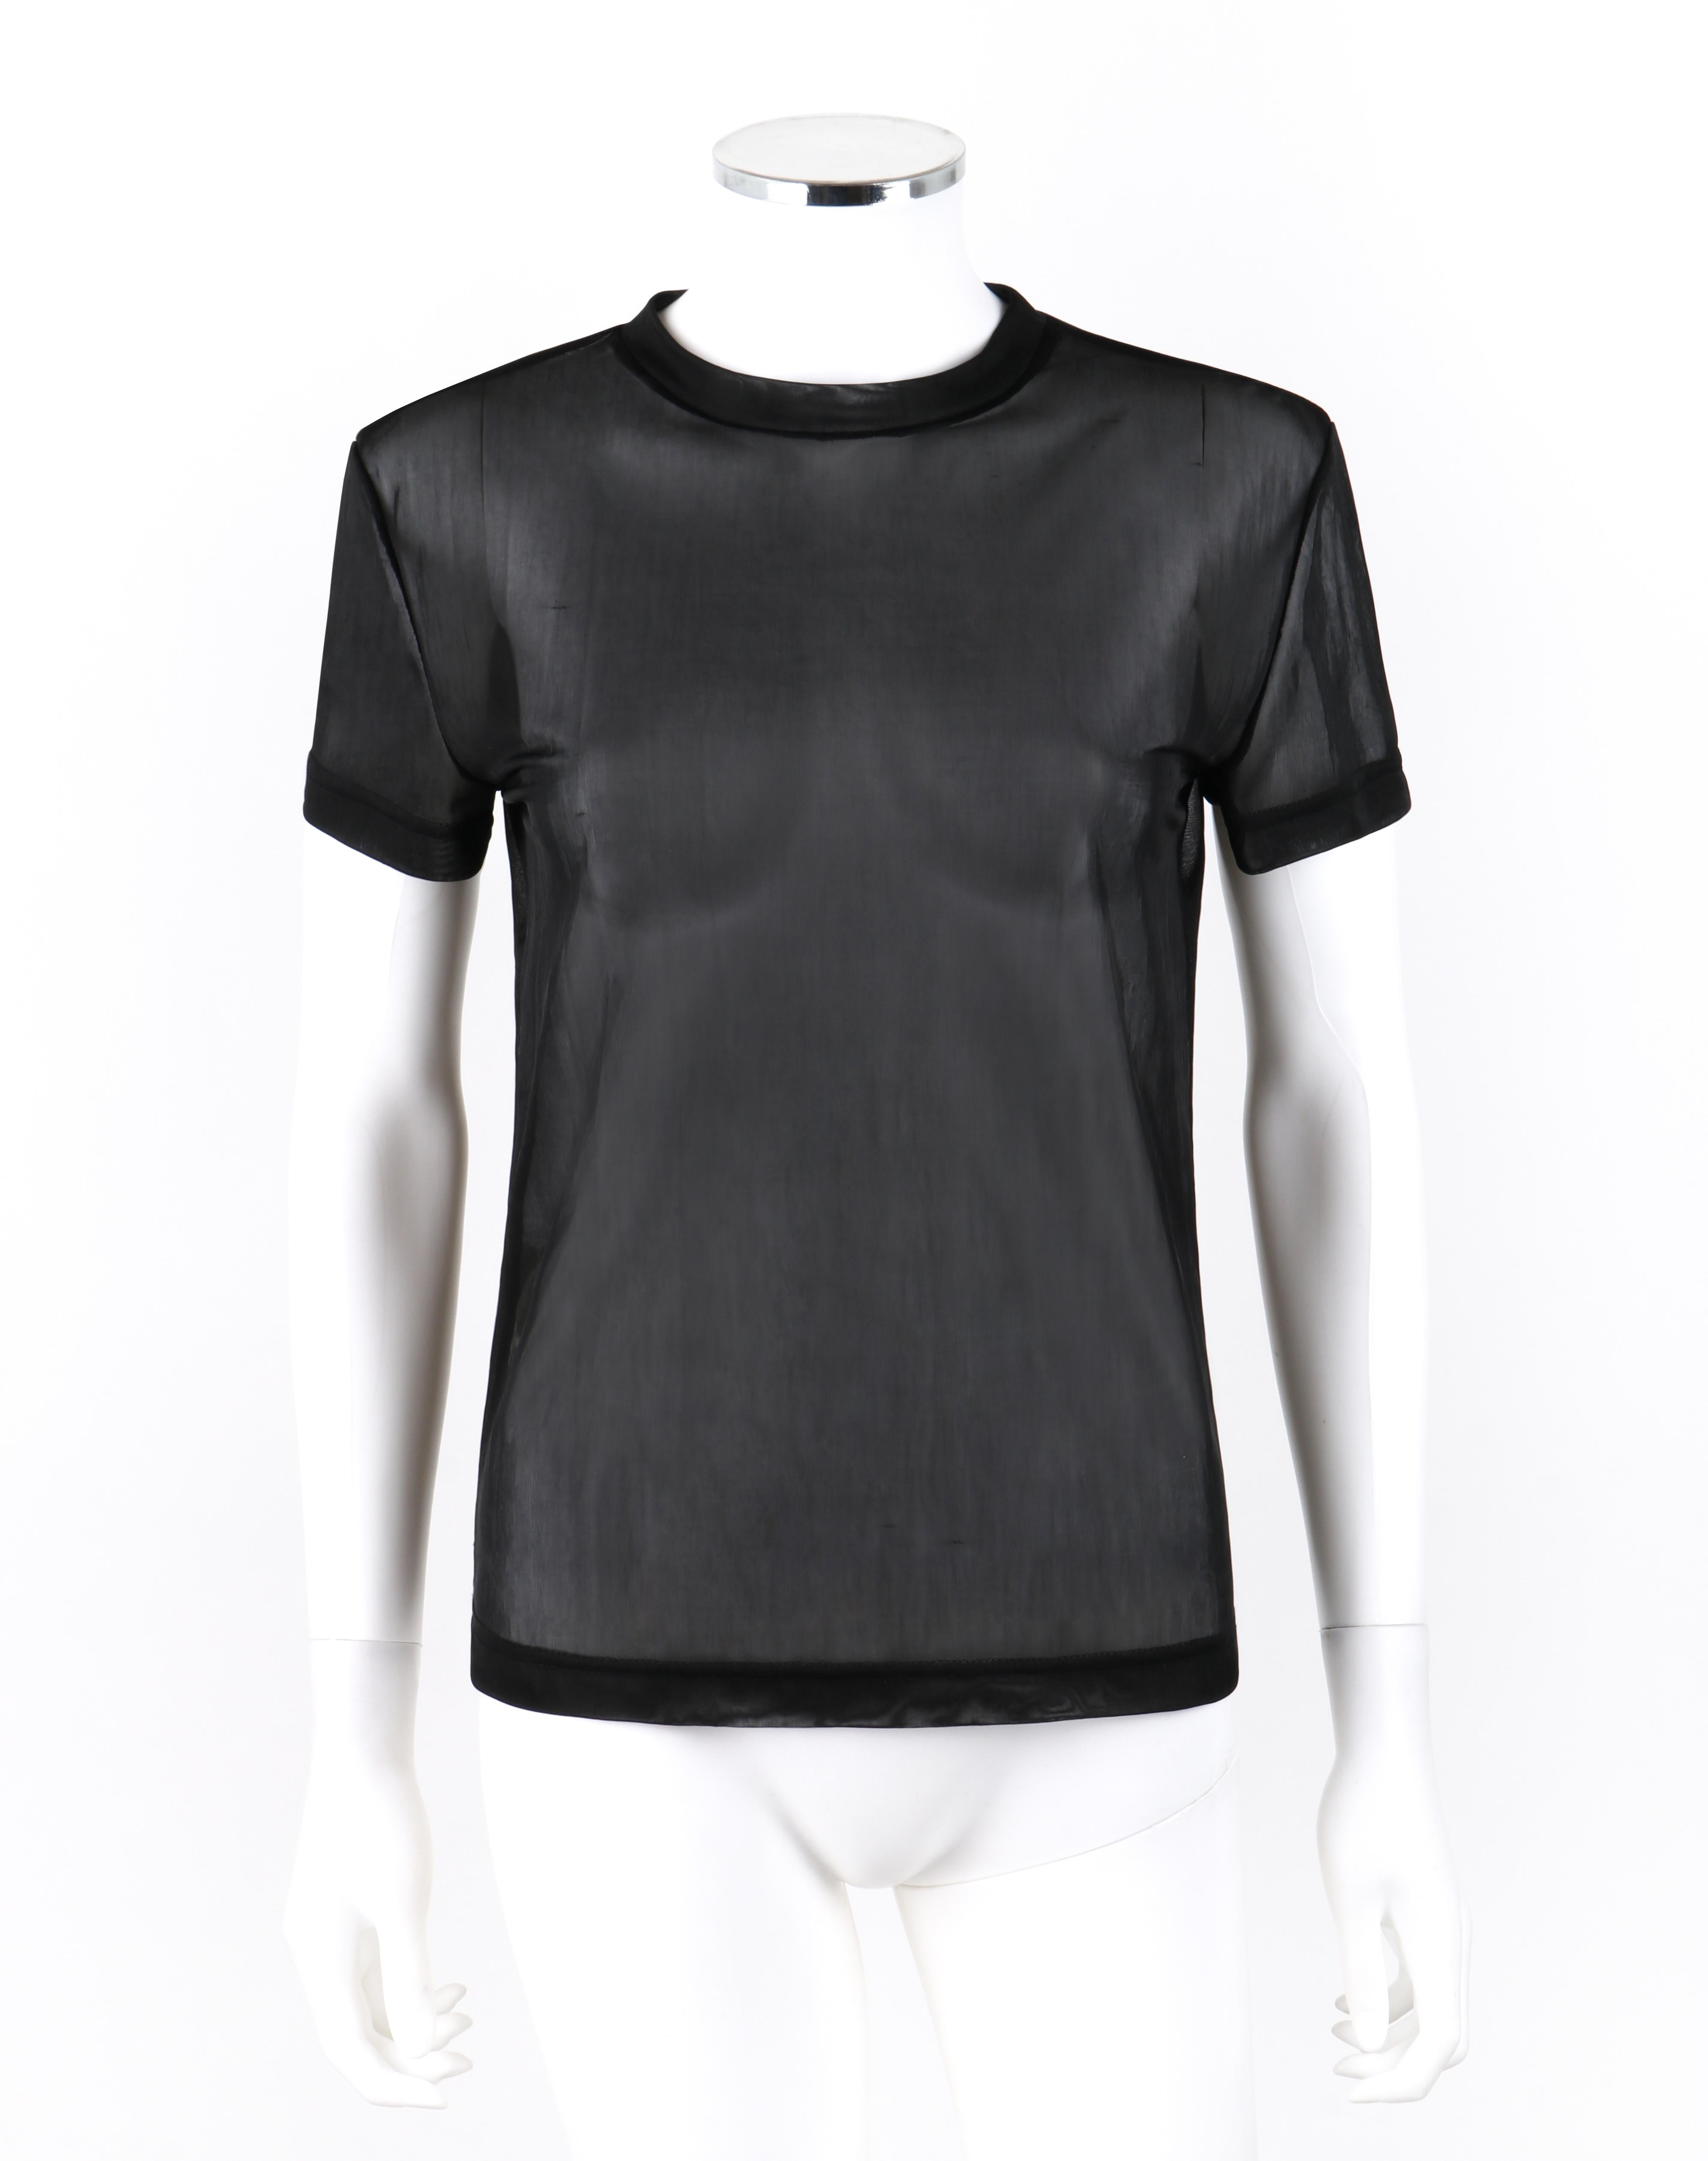 ALEXANDER McQUEEN S/S 2000 “Eye” Black Silver Metallic Athletic Jersey Patch Top
 
Brand / Manufacturer: Alexander McQueen
Collection: S/S 2000 “Eye”
Designer: Alexander McQueen
Style: T-shirt top
Color(s): Shades of black, silver, gray
Lined: